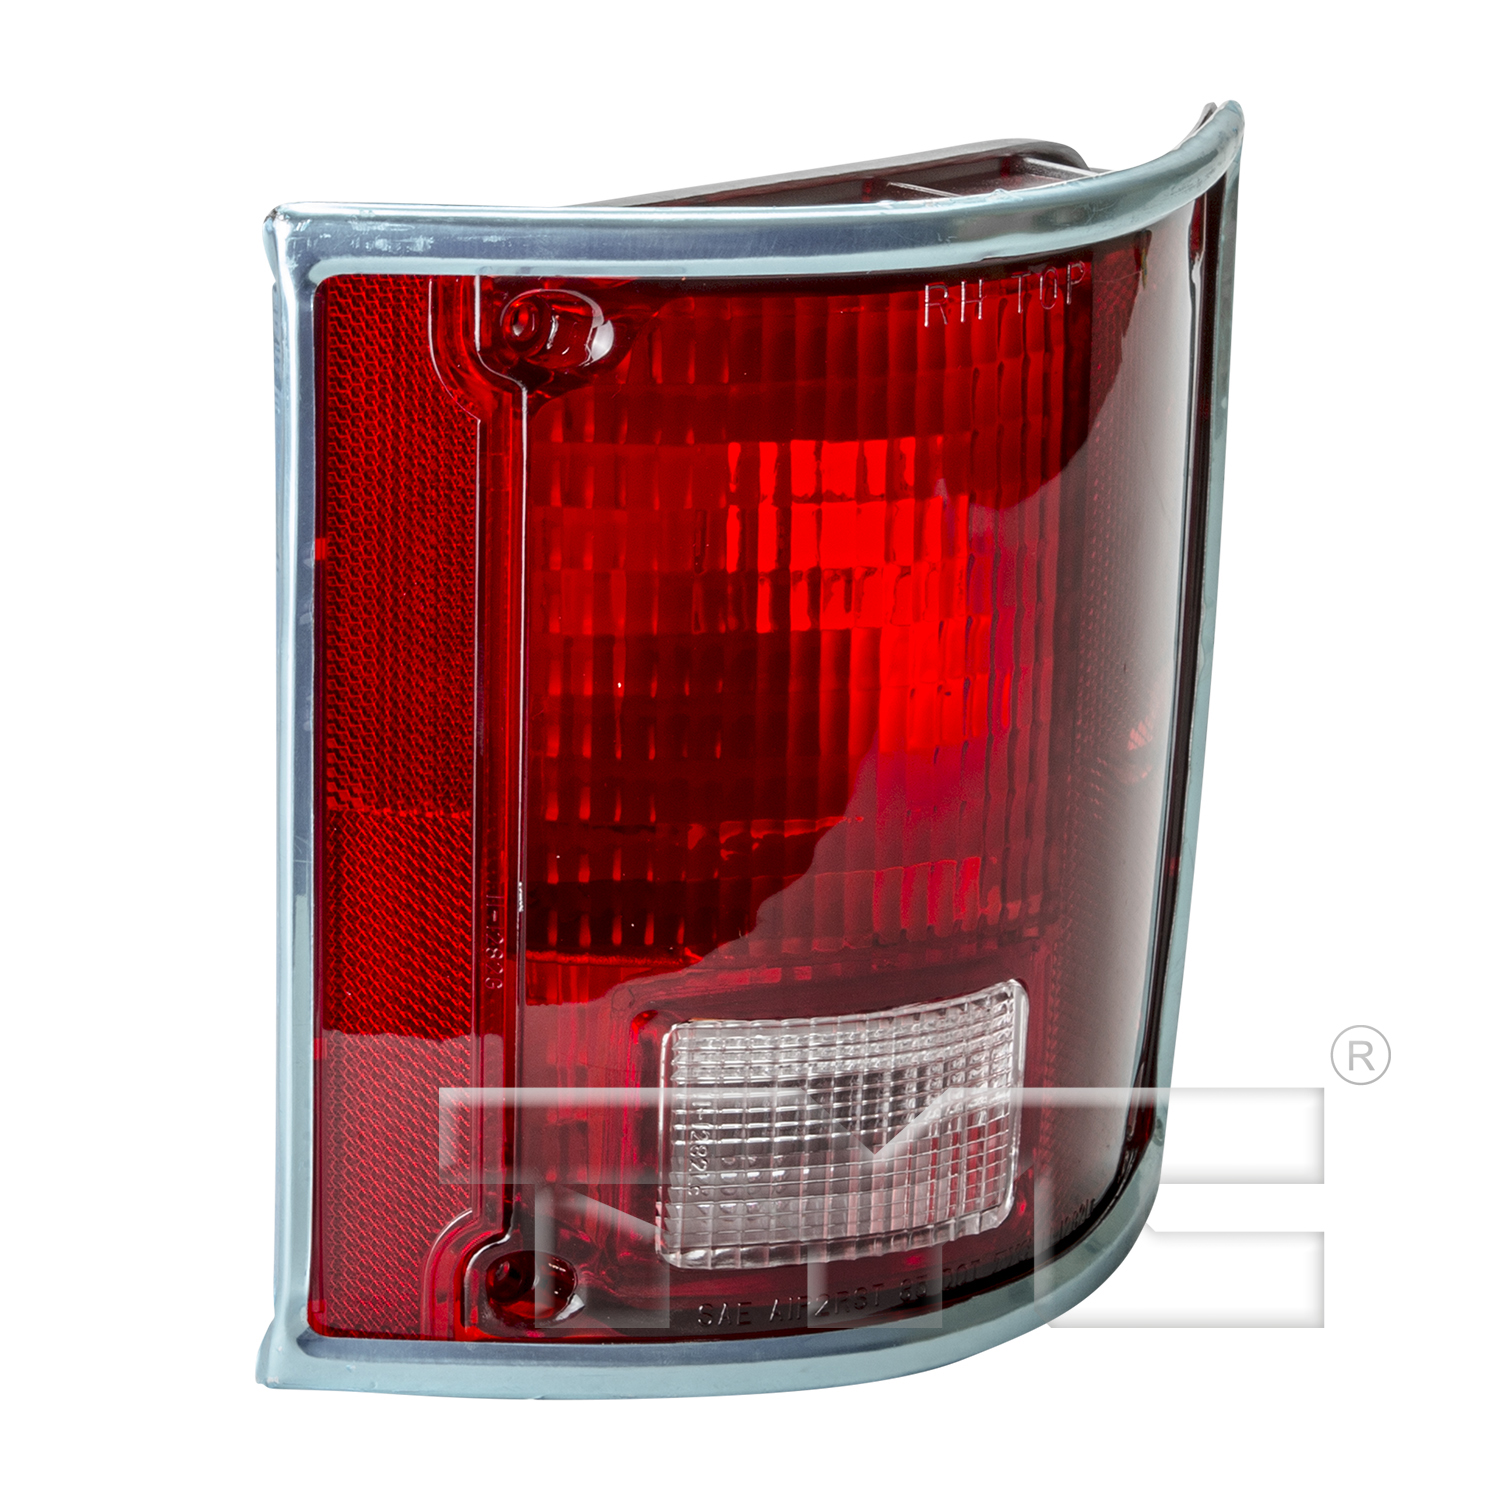 Aftermarket TAILLIGHTS for GMC - JIMMY, JIMMY,78-91,RT Taillamp assy